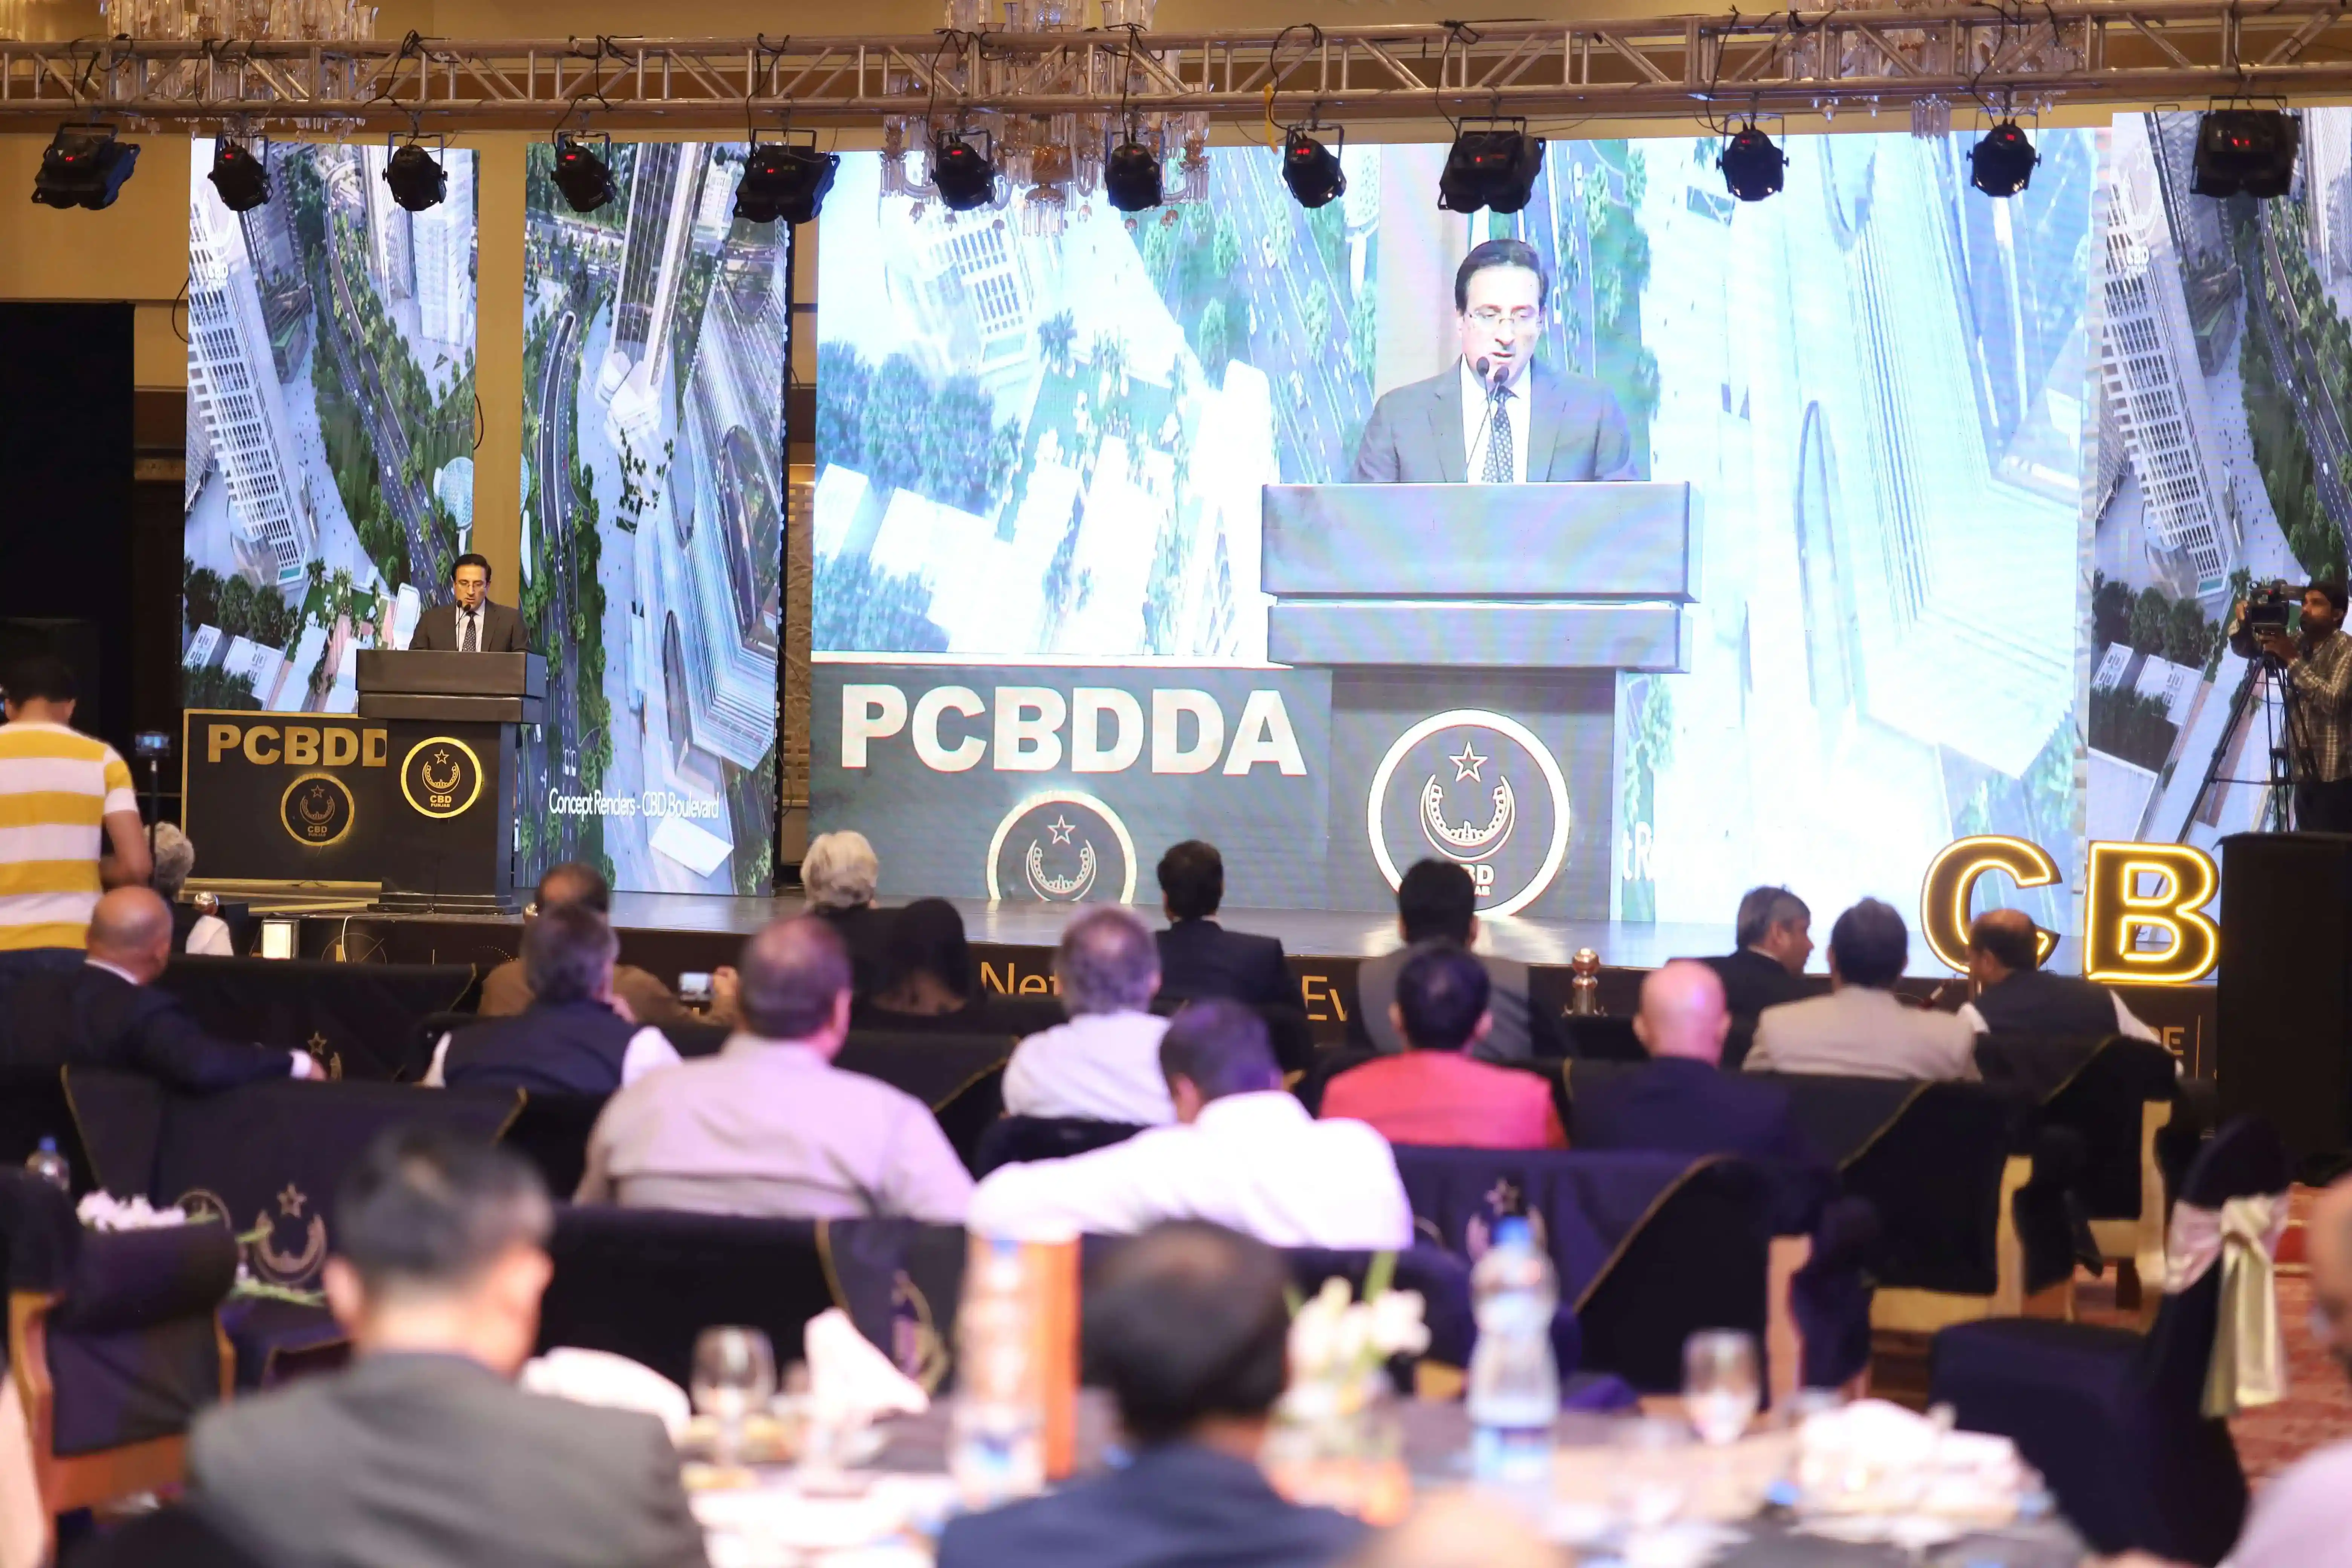 PCBDDA HOSTED A MEETUP TO STRENGTHEN TIES WITH THE BUSINESS COMMUNITY